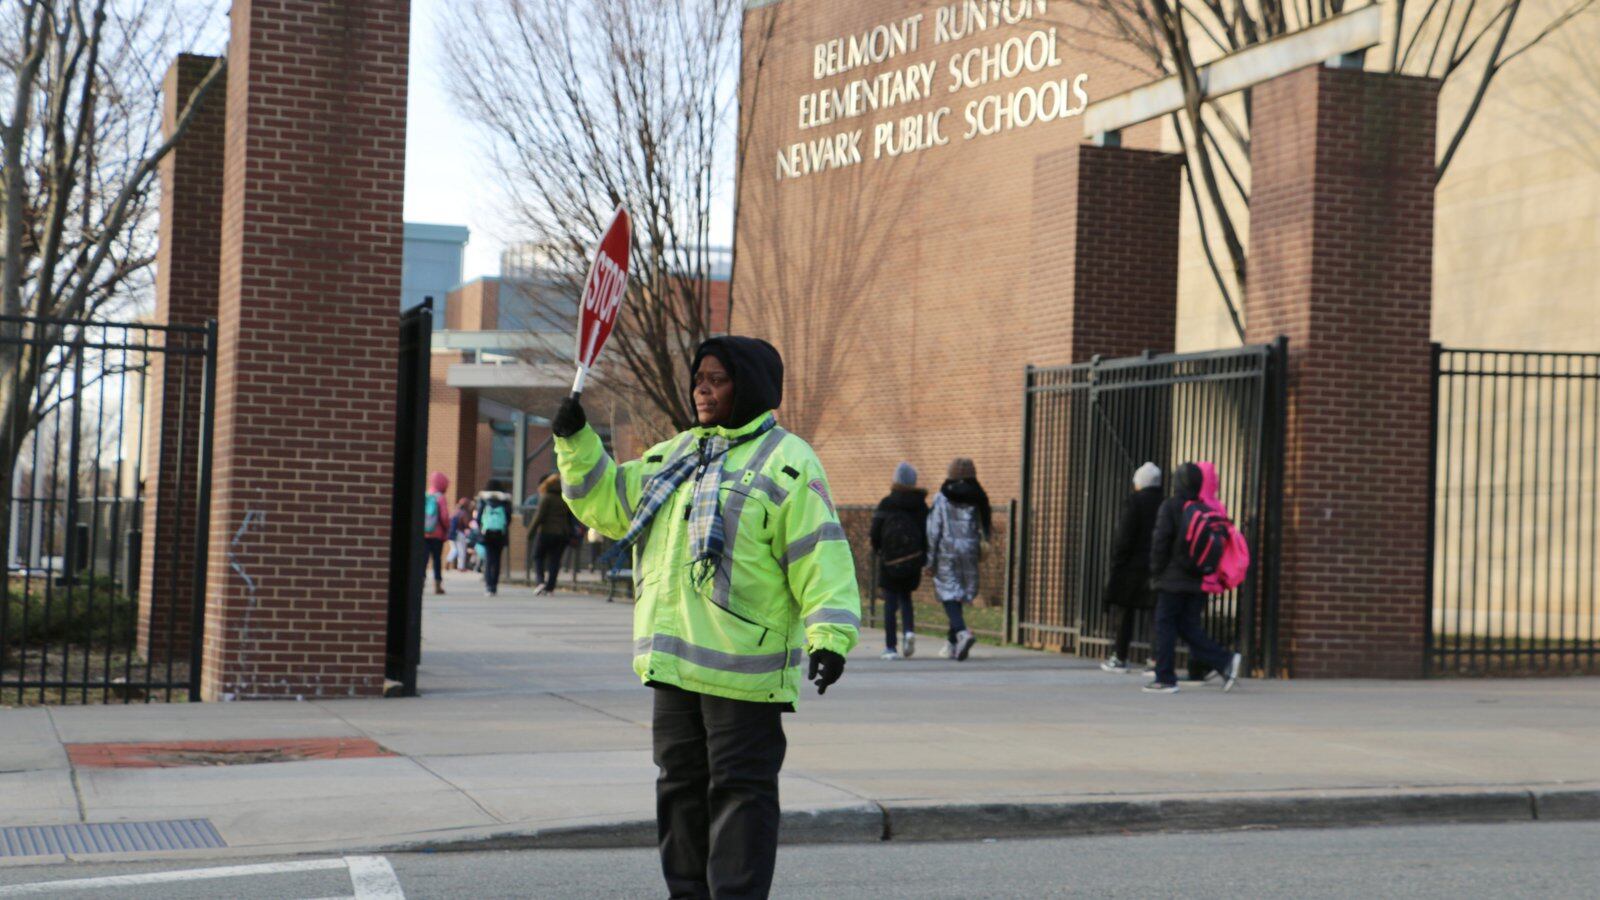 Belmont Runyon is one of five South Ward schools in a program designed to infuse high-poverty schools with extra resources.